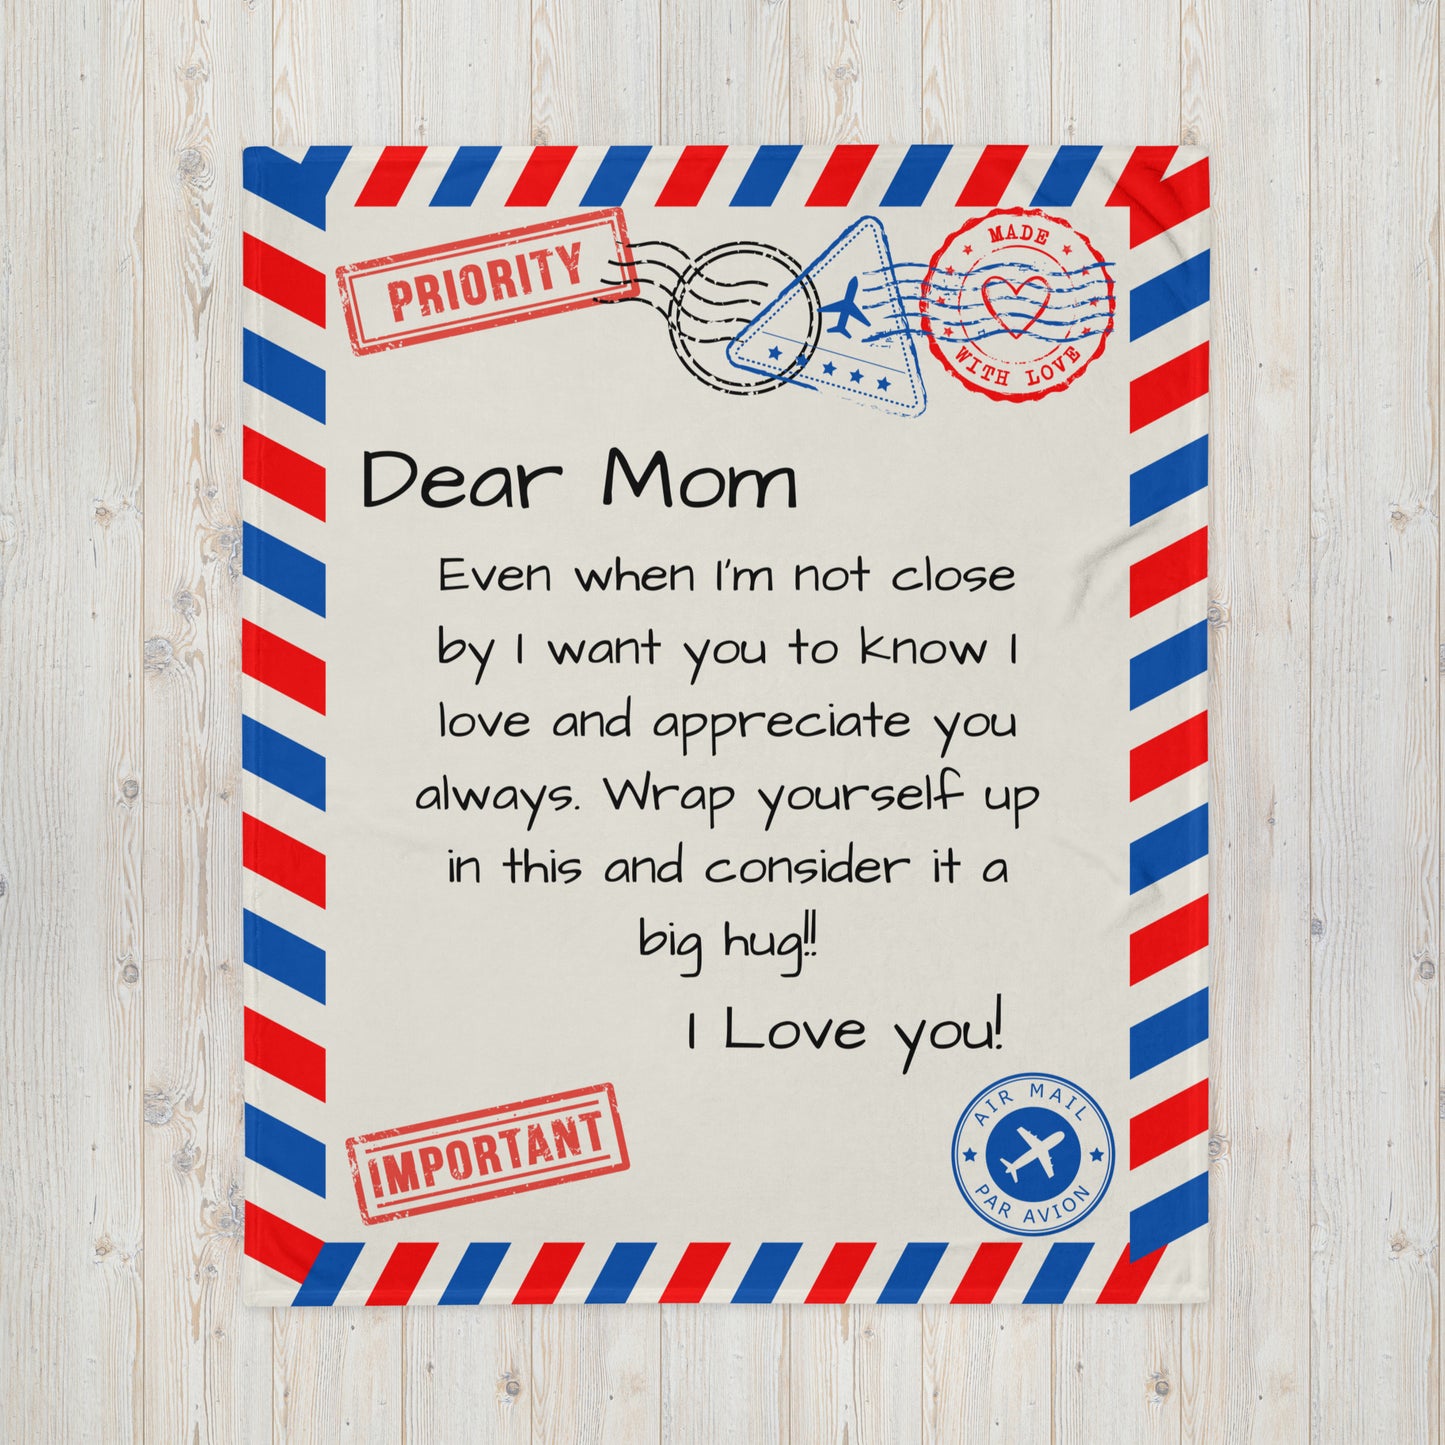 Throw Blanket, Personal Gift Mom, Thankful Gift Mom, Personal Gift Mom Birthday, Blanket Printing, Giant Blankets